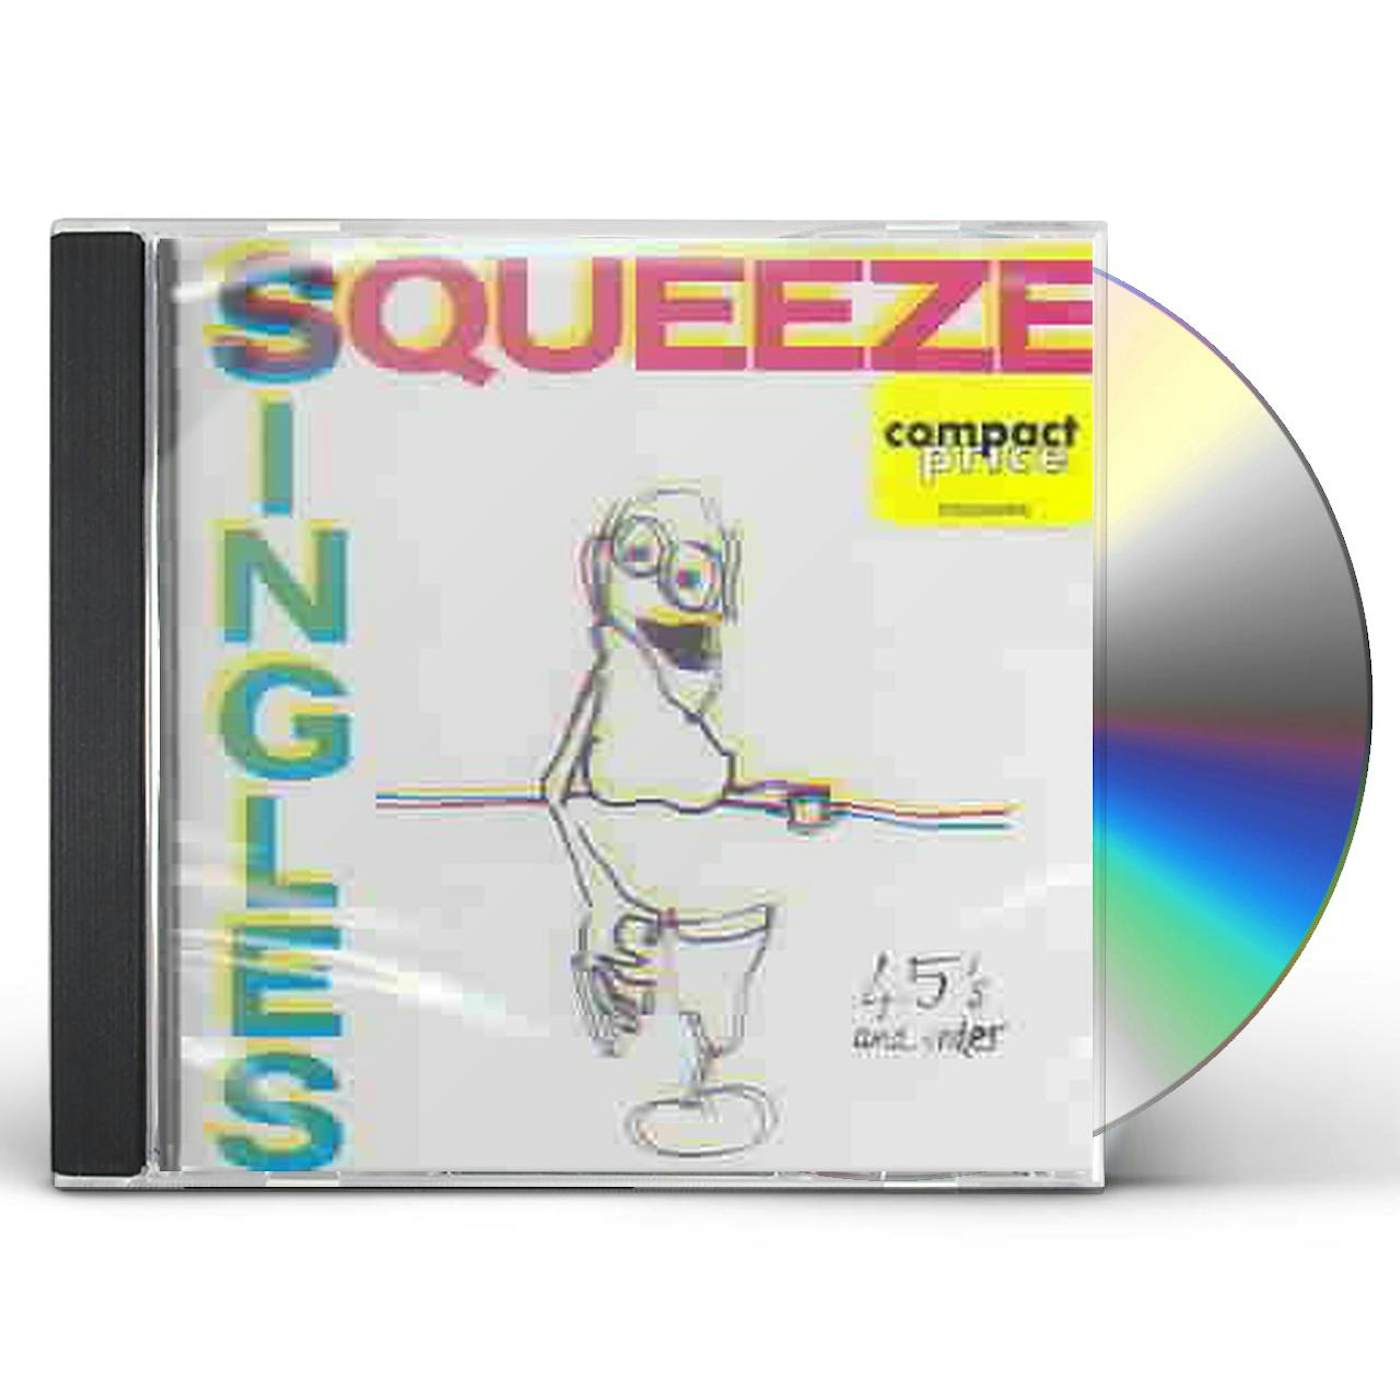 Squeeze 20TH CENTURY MASTERS: MILLENNIUM COLLECTION CD